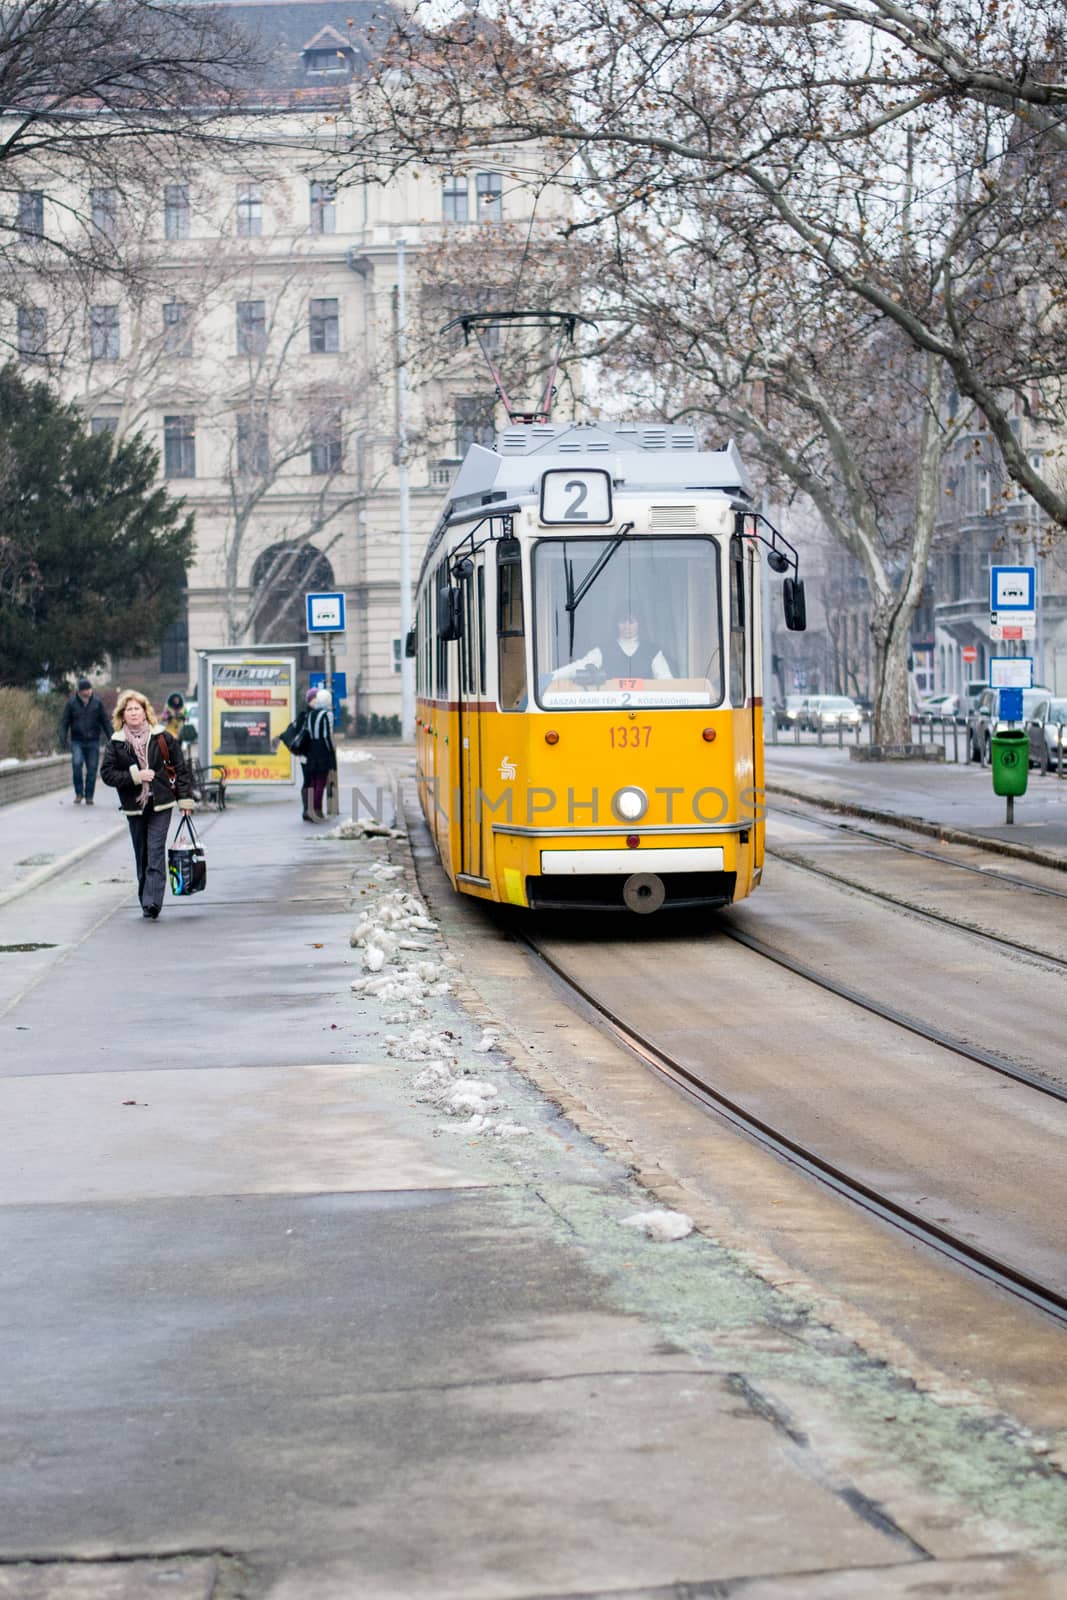 Budapest, Hungary, February 2013: Old tram navigating through the city